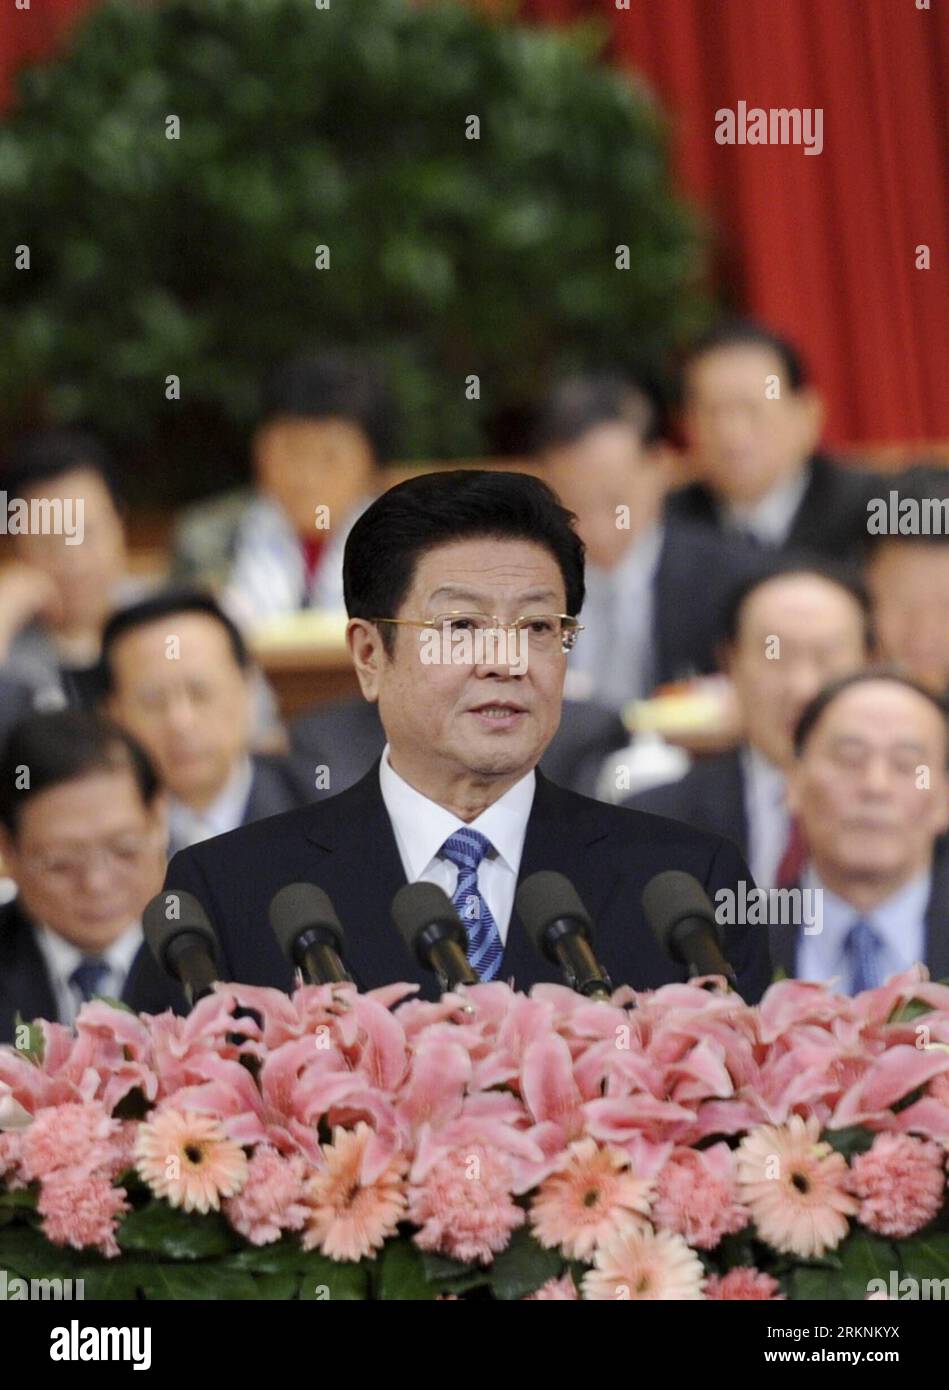 Bildnummer: 57287127  Datum: 08.03.2012  Copyright: imago/Xinhua (120308) -- BEIJING, March 8, 2012 (Xinhua) -- Wang Zhaoguo, vice chairman of the Standing Committee of the National People s Congress (NPC), gives explanations of the draft amendment to the Criminal Procedural Law during the second plenary meeting of the Fifth Session of the 11th NPC at the Great Hall of the in Beijing, capital of China, March 8, 2012. (Xinhua/Zhang Duo) (llp) (TWO SESSIONS)CHINA-BEIJING-NPC-SECOND PLENARY MEETING (CN) PUBLICATIONxNOTxINxCHN People Politik China Nationaler Volkskongress NPC xcb x0x 2012 hoch Stock Photo